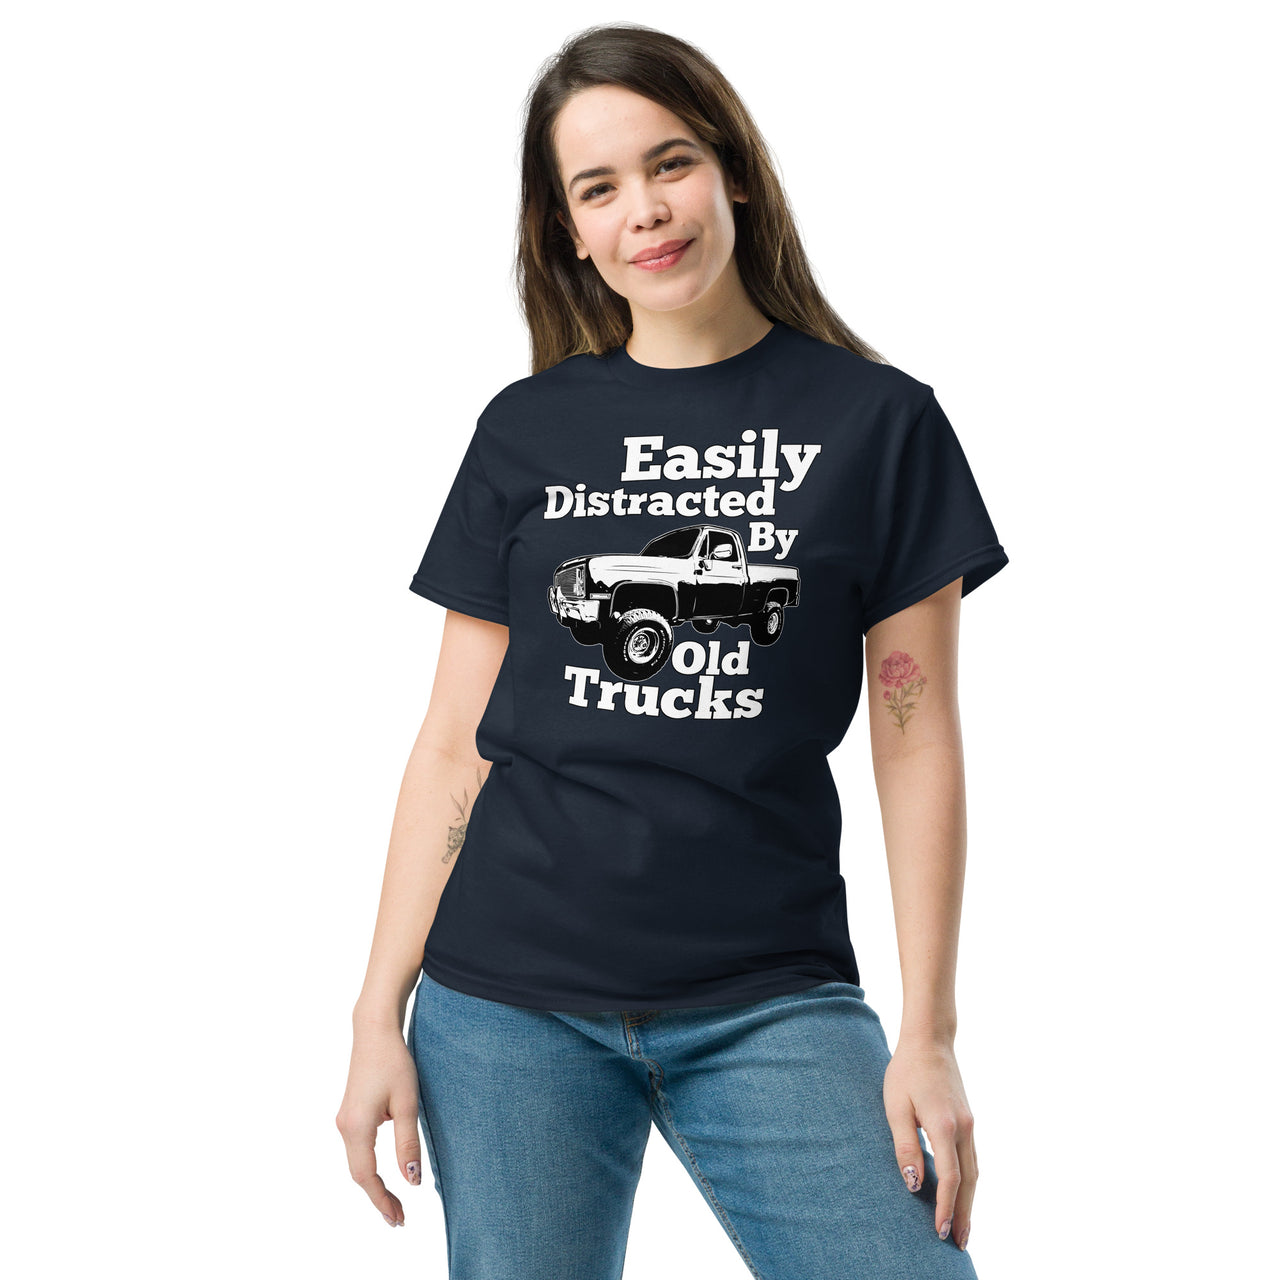 woman modeling Square Body Truck T-Shirt - Easily Distracted By Old Trucks